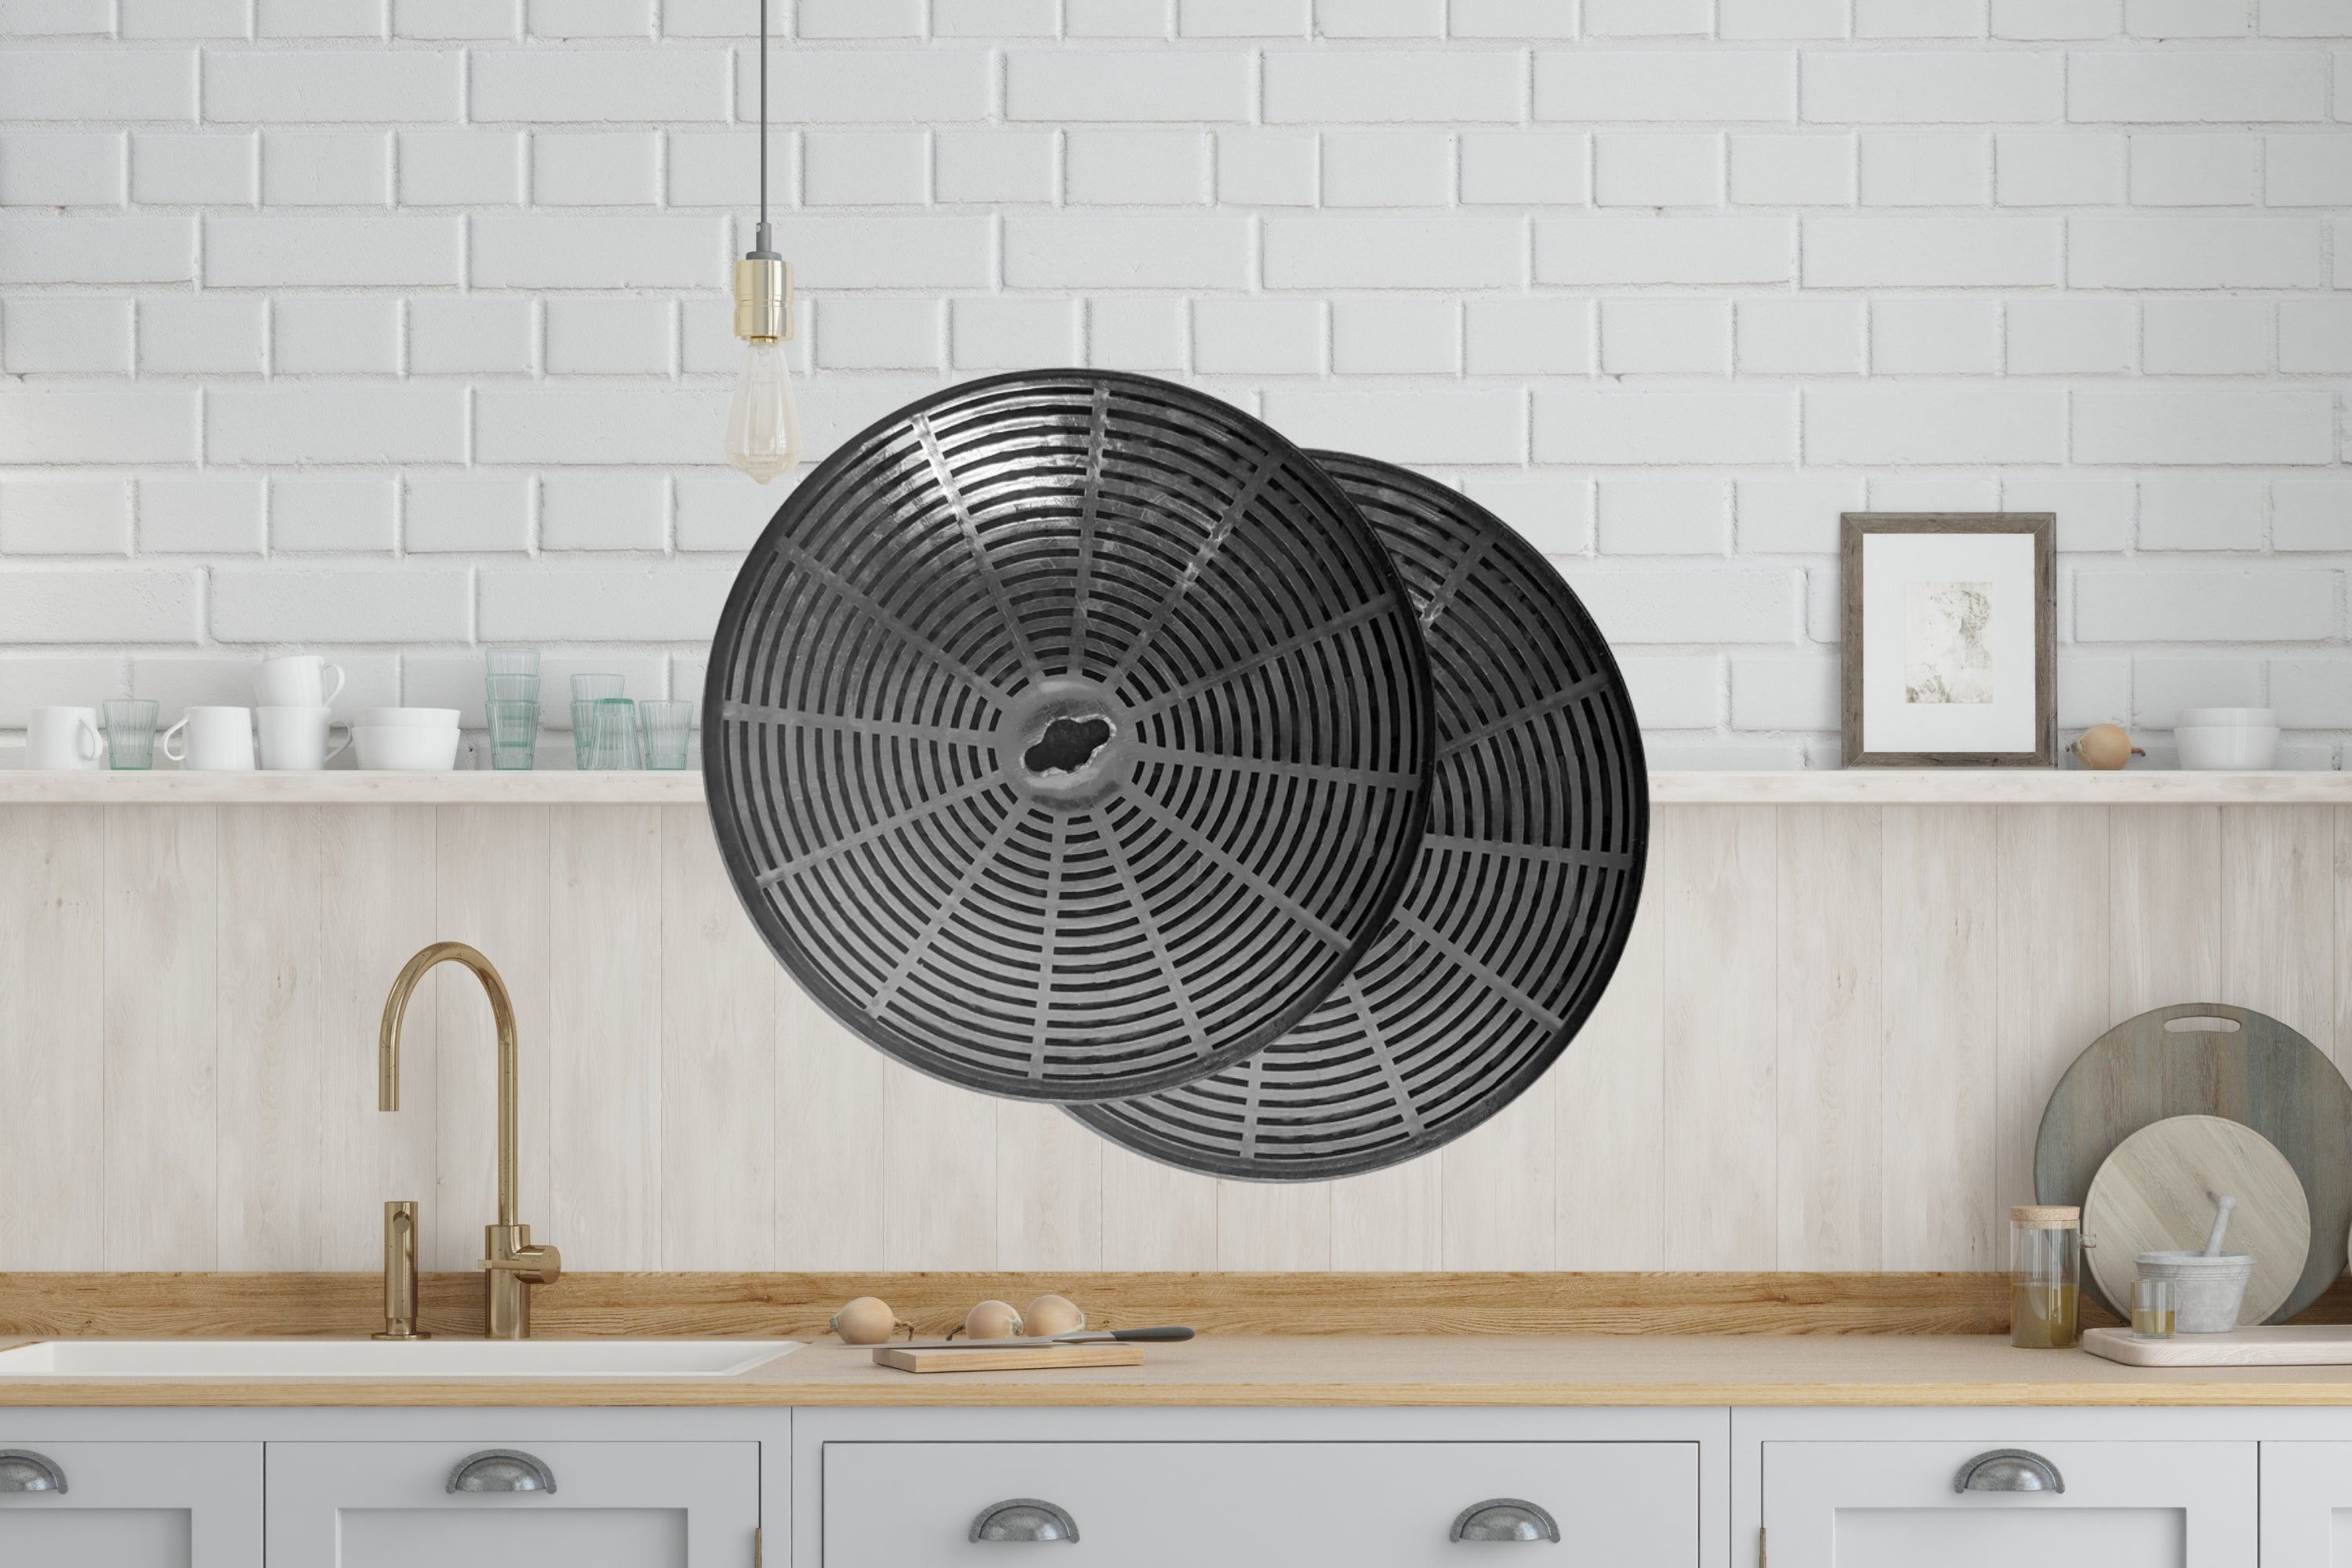 Charcoal Filters for Ductless Range Hoods: Why to use them and how to install